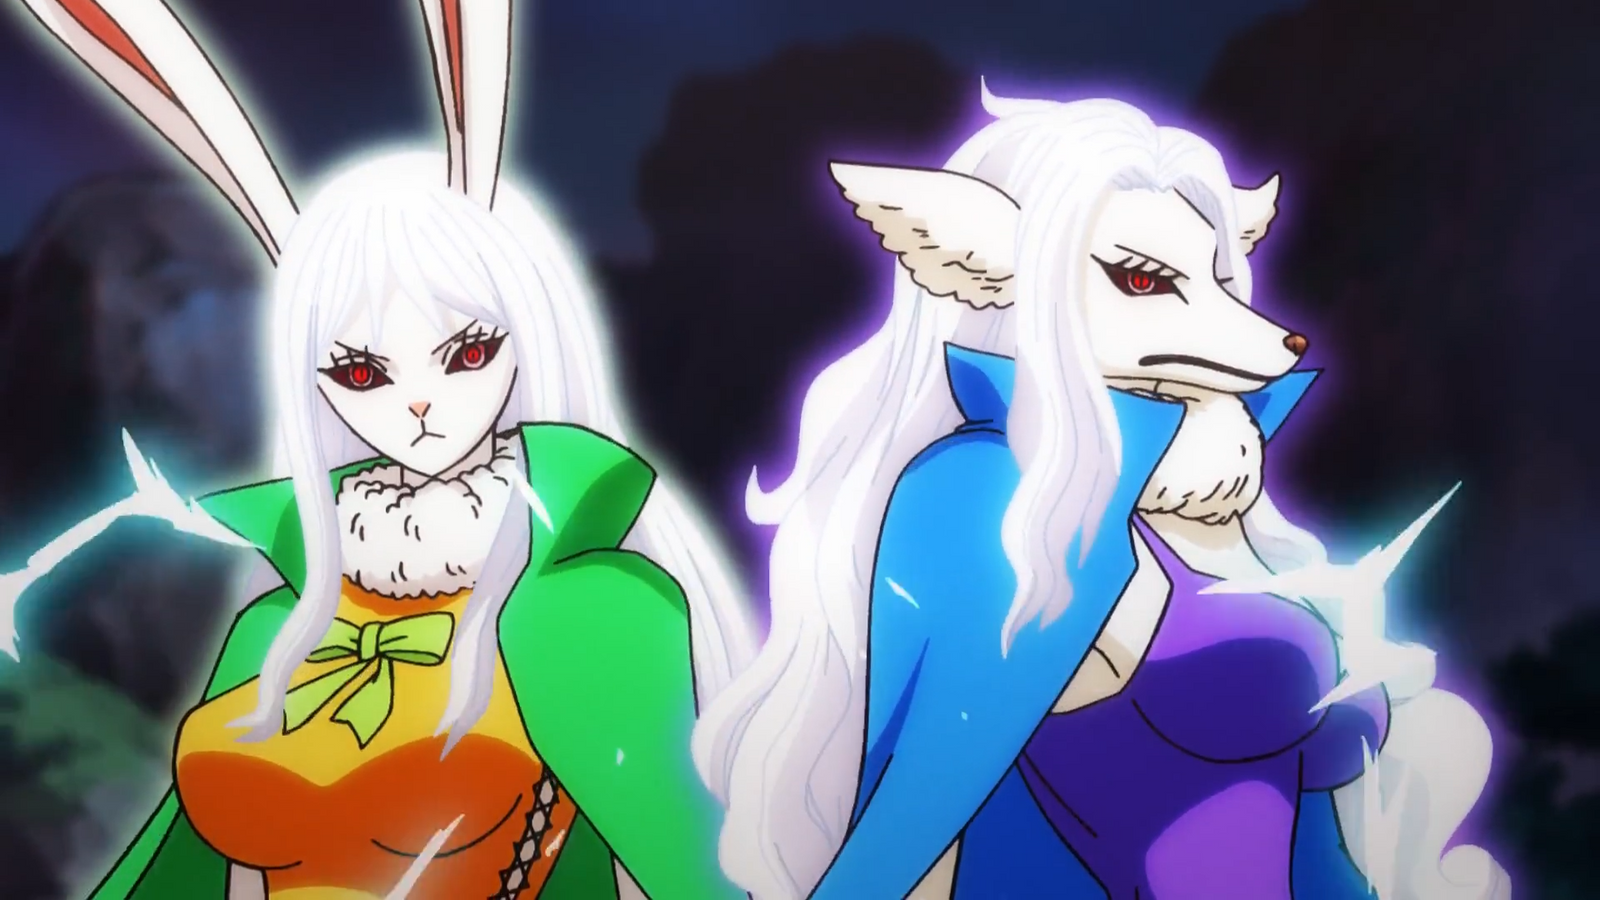 Wanda and Carrot in their Sulong form in the Wano arc of One Piece.